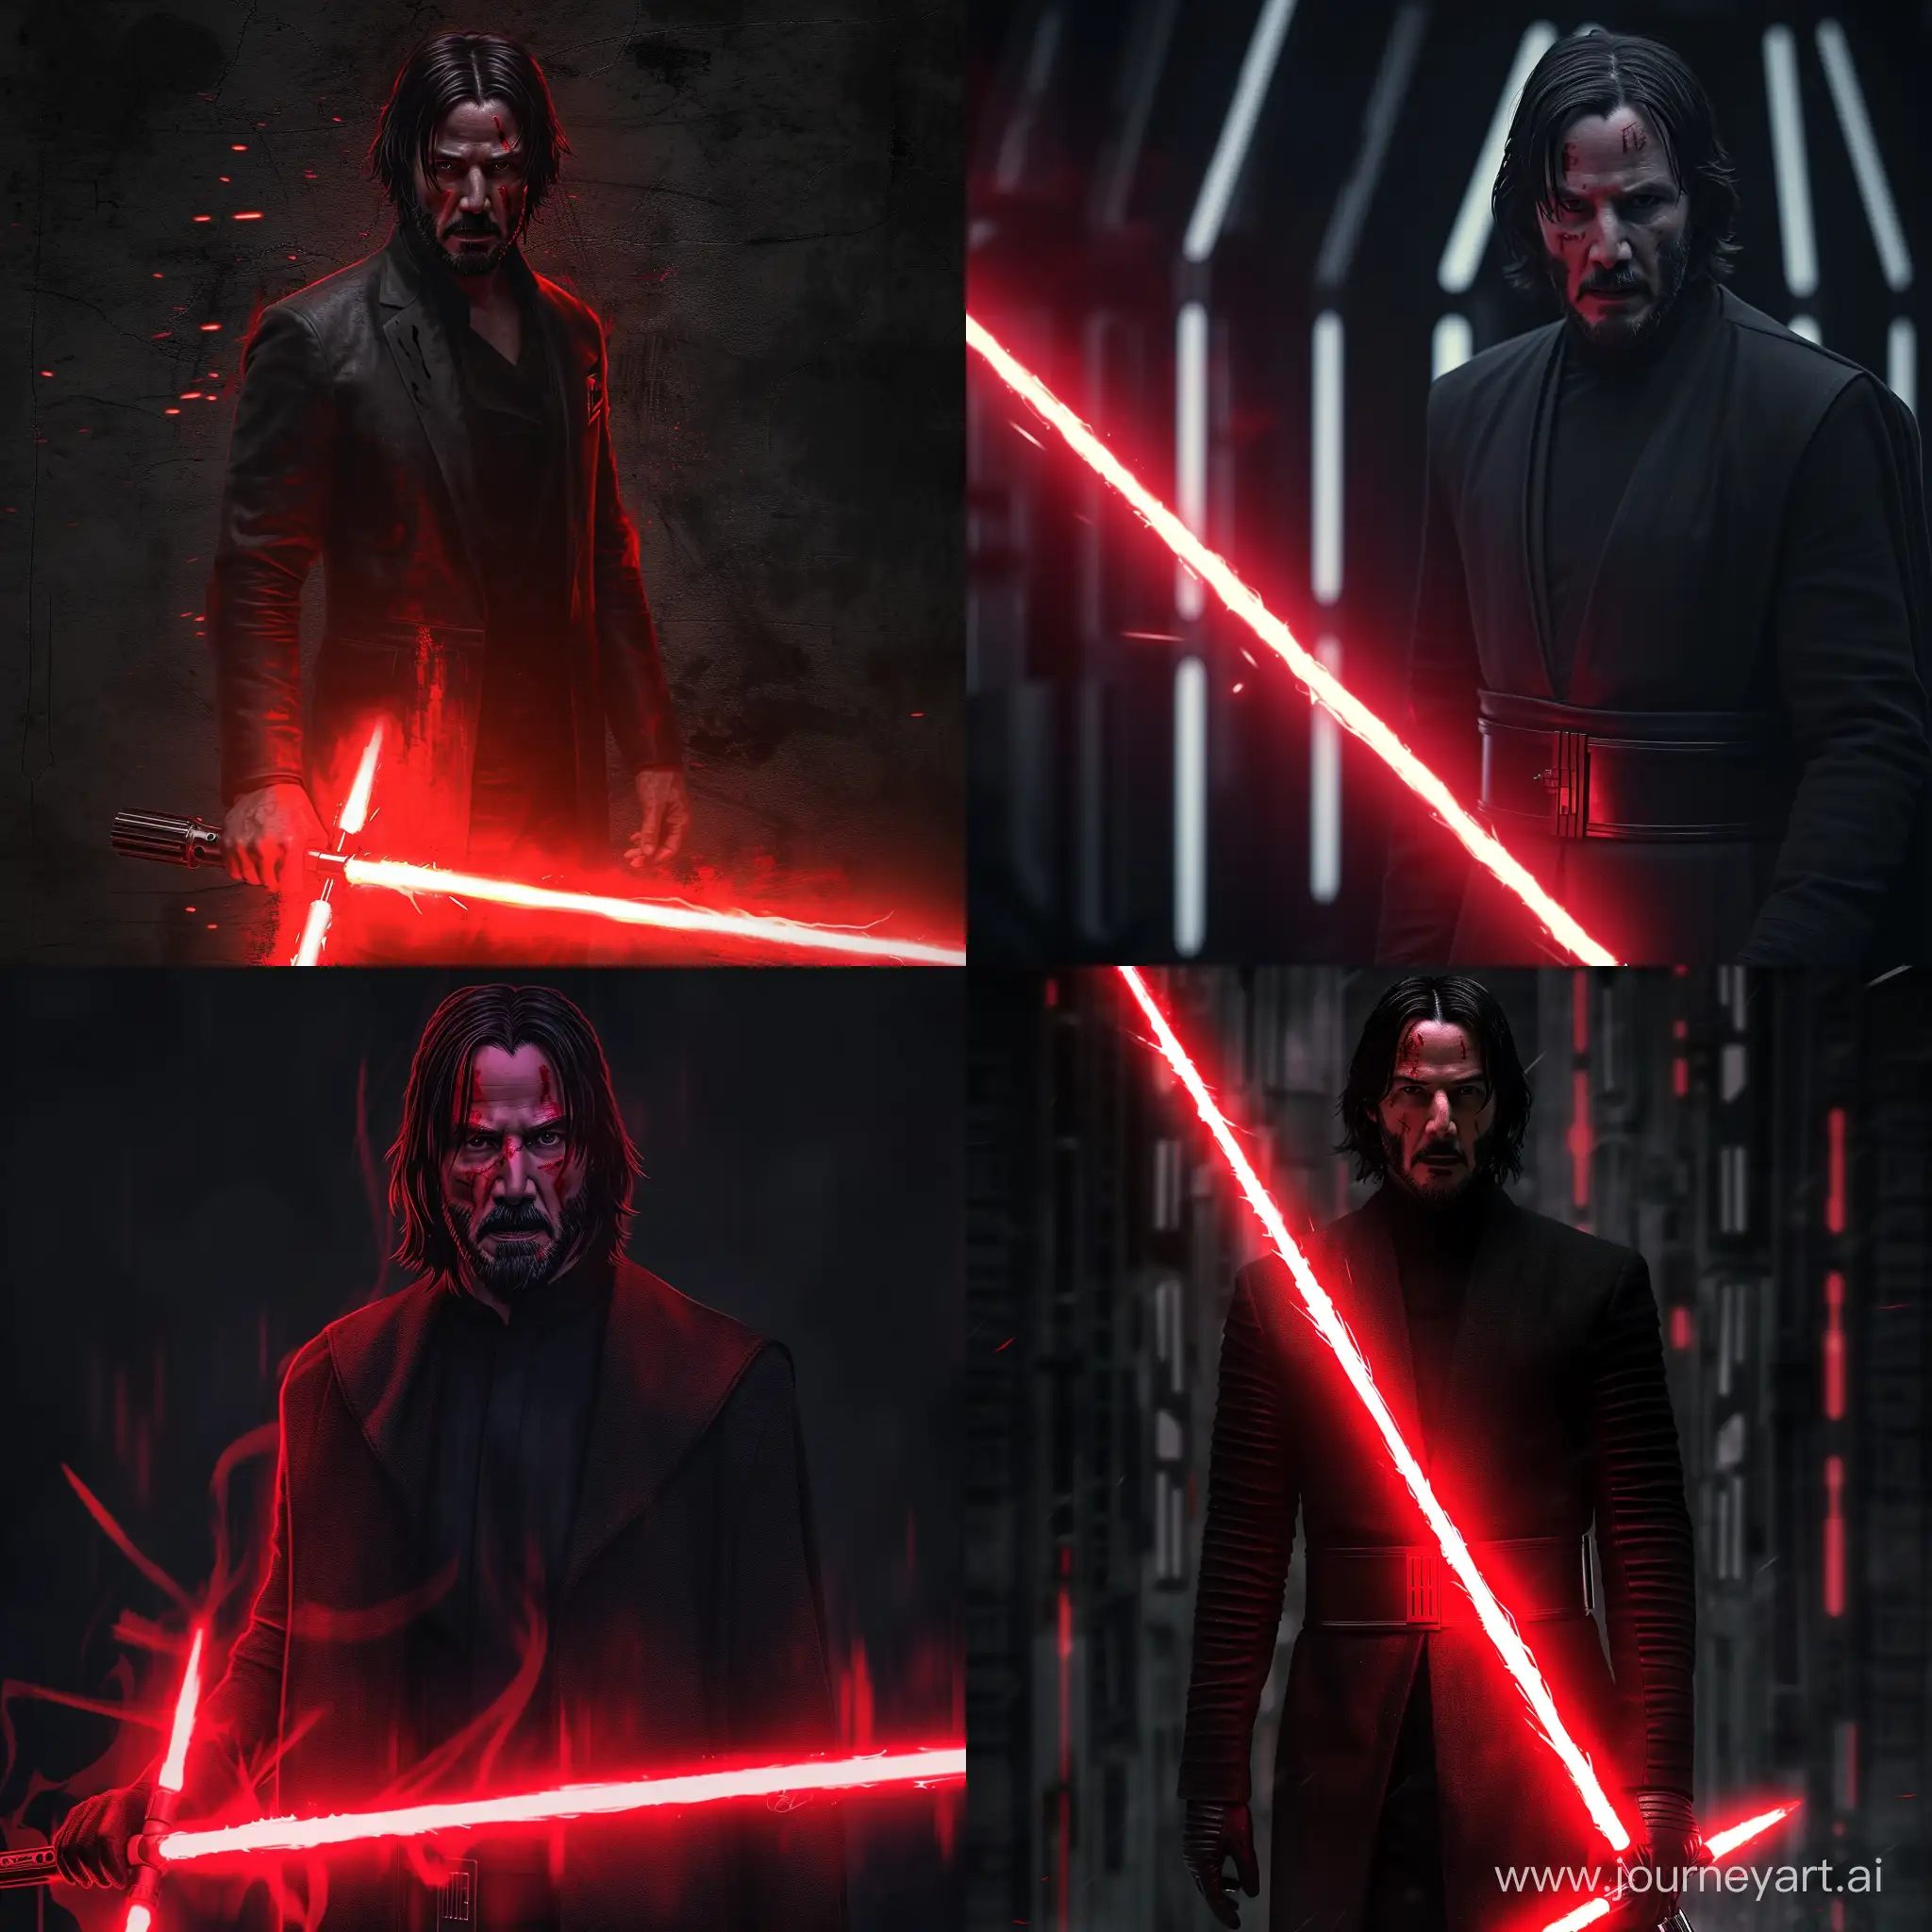 John-Wick-Sith-Art-Realistic-Star-Wars-Illustration-with-Red-Lightsaber